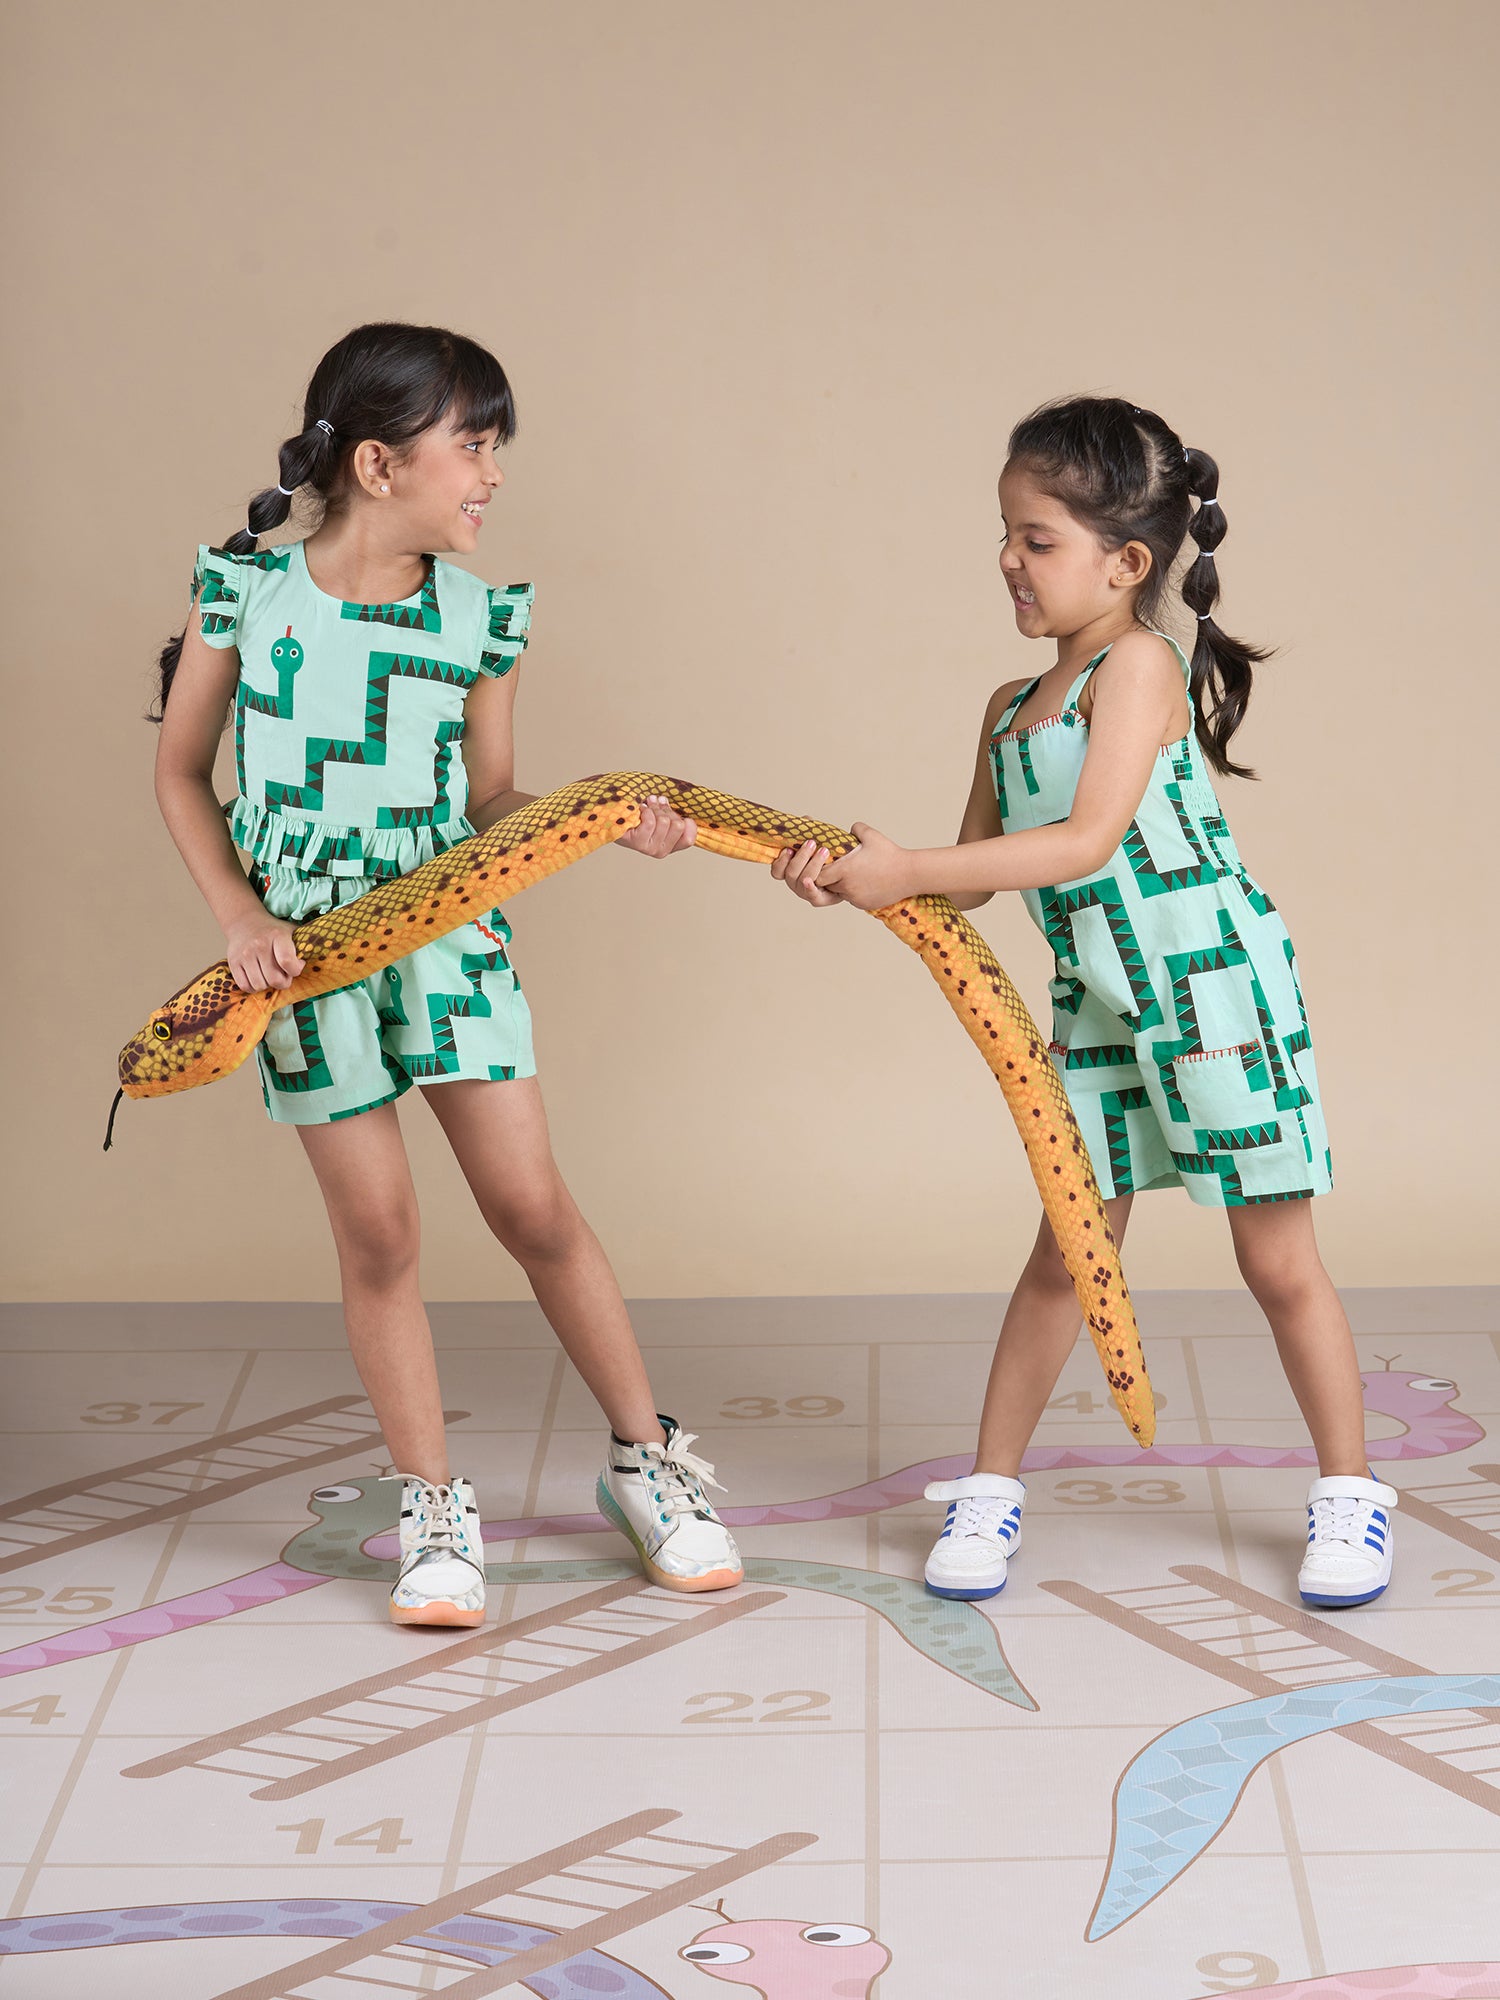 Snakes And Ladders Girls Green Table Print Jumpsuit From Siblings Collection - Lil Drama